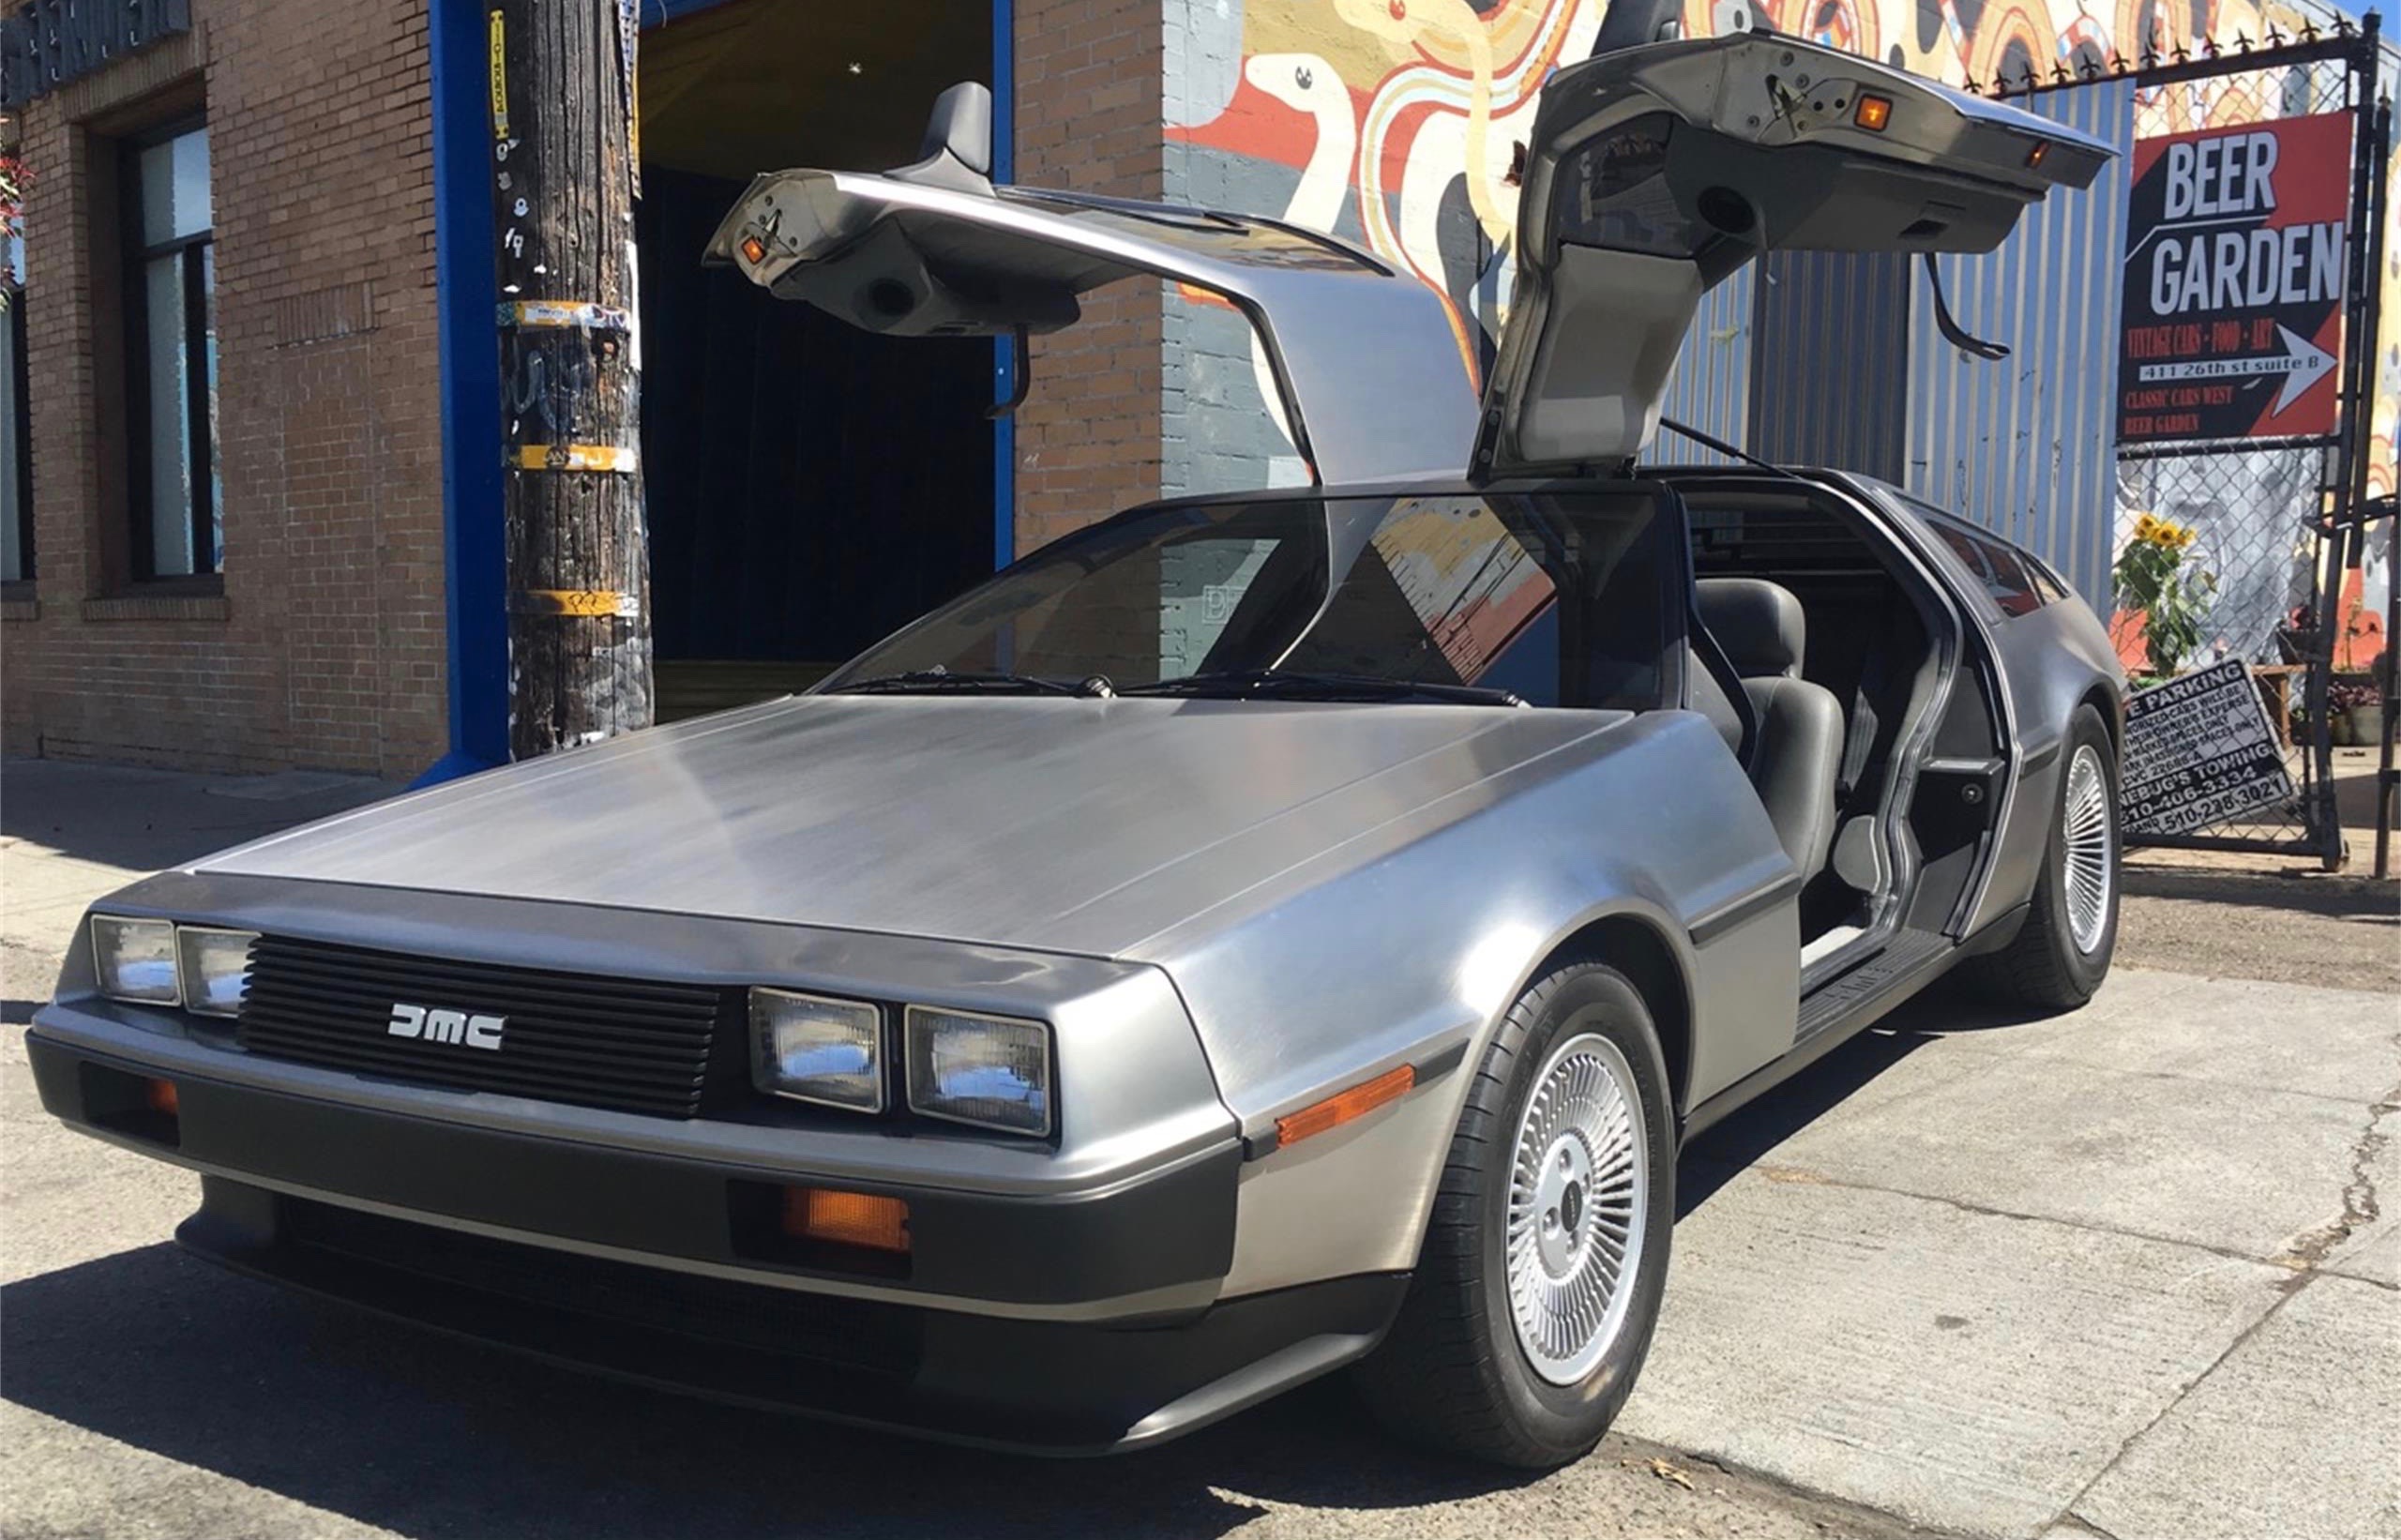 Most searched, VW van, DeLorean soar in searches on ClassicCars.com, ClassicCars.com Journal